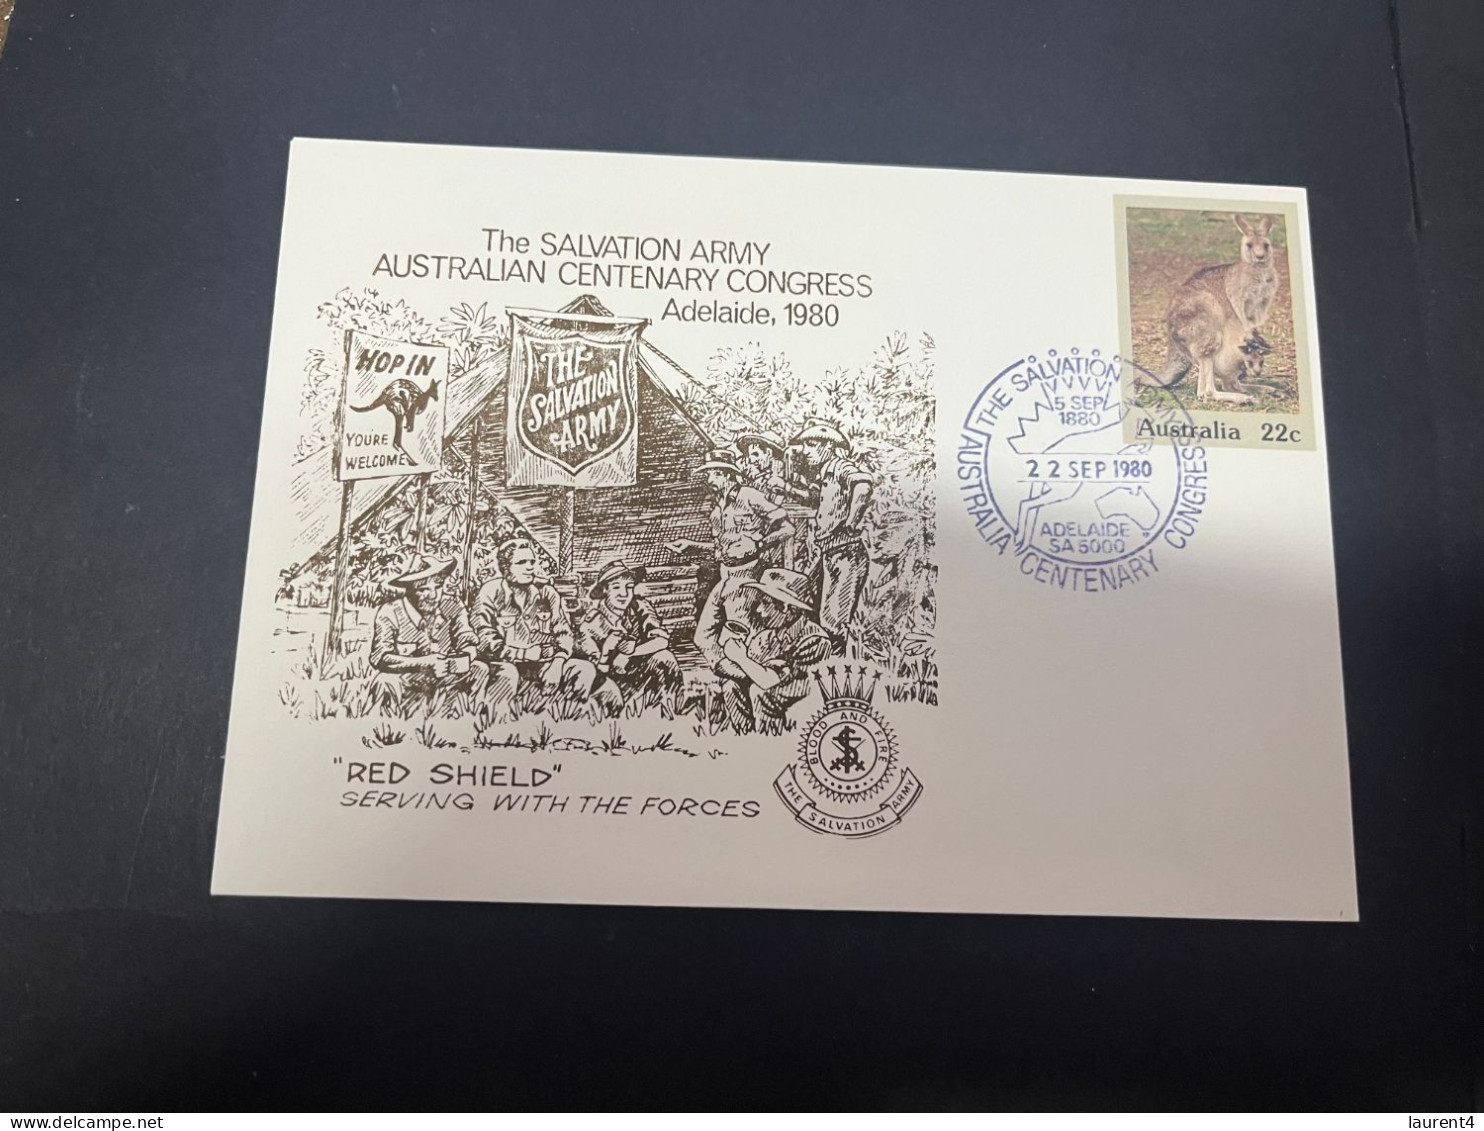 2-5-2024 (3 Z 39) Australia FDC (1 Covers) 1980 - Salvation Army Australian Centenary Congress In Adelaide (Kangaroo) - Primo Giorno D'emissione (FDC)